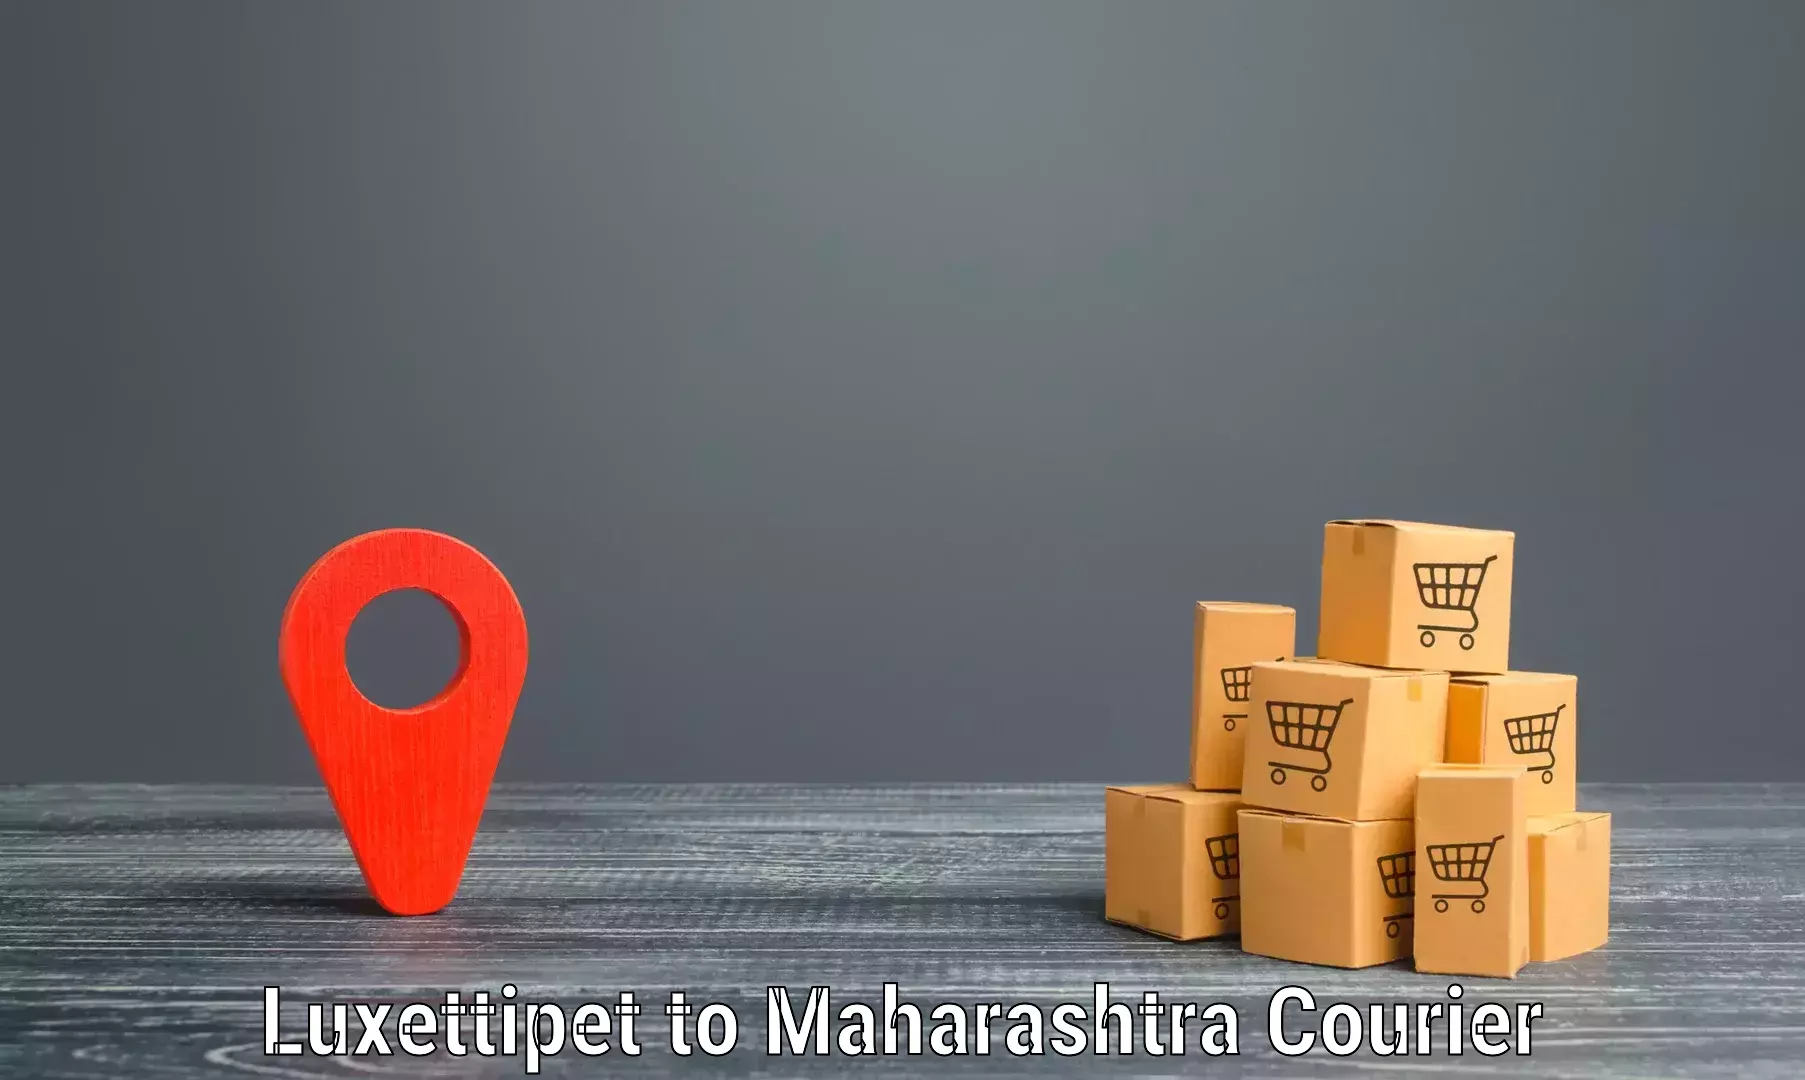 Personal parcel delivery in Luxettipet to Shirur